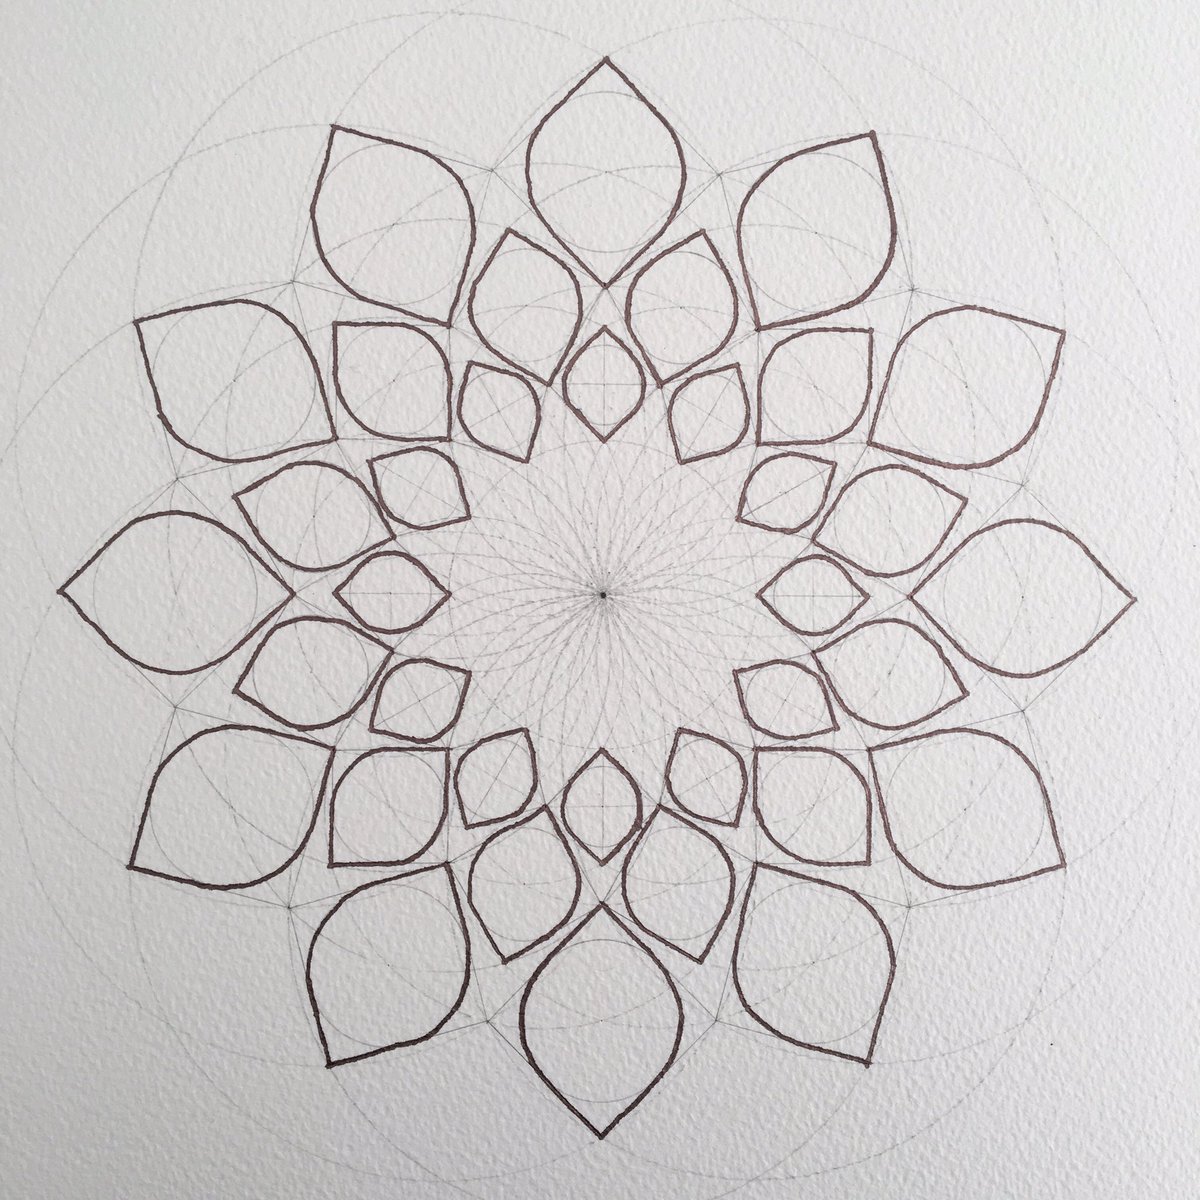 I first outlined in a copper marker. It felt a bit empty in the middle, so I decided to pick out a flower shape from the underlying circular grid. Still unsure about this decision! At this stage I thought I’d ruined it, but it has grown on me.